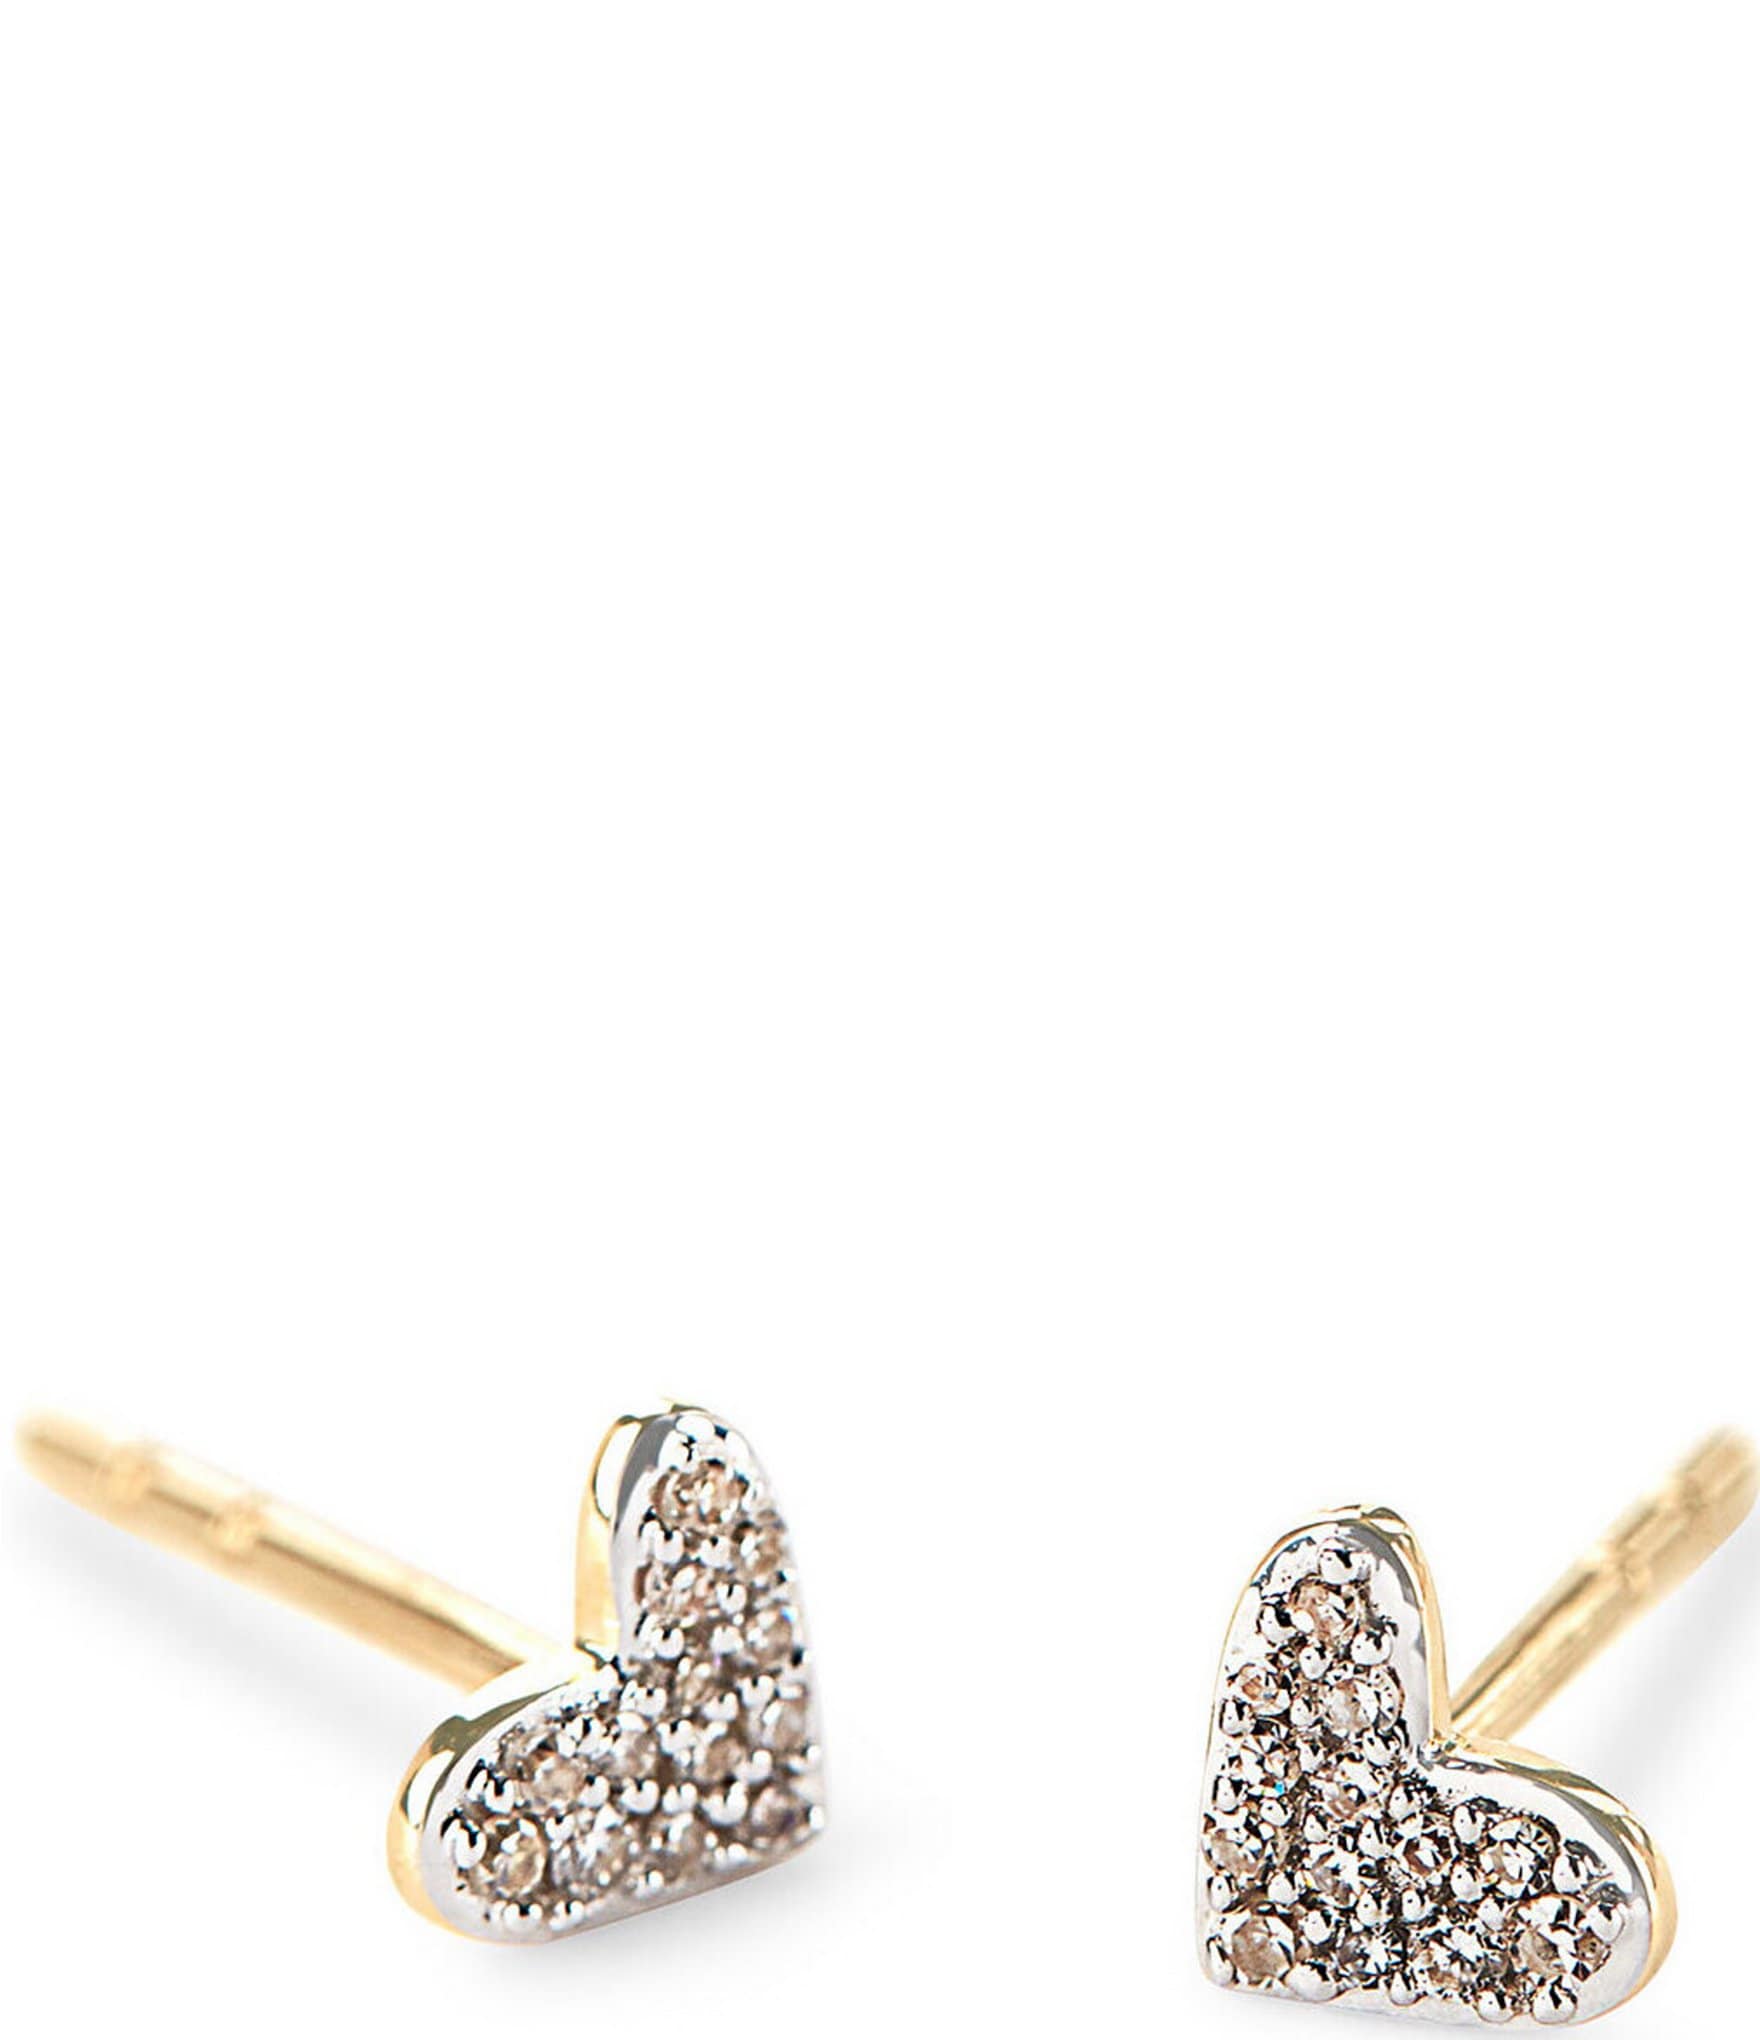 Kendra Scott - Beautifully timeless and personal to each wearer